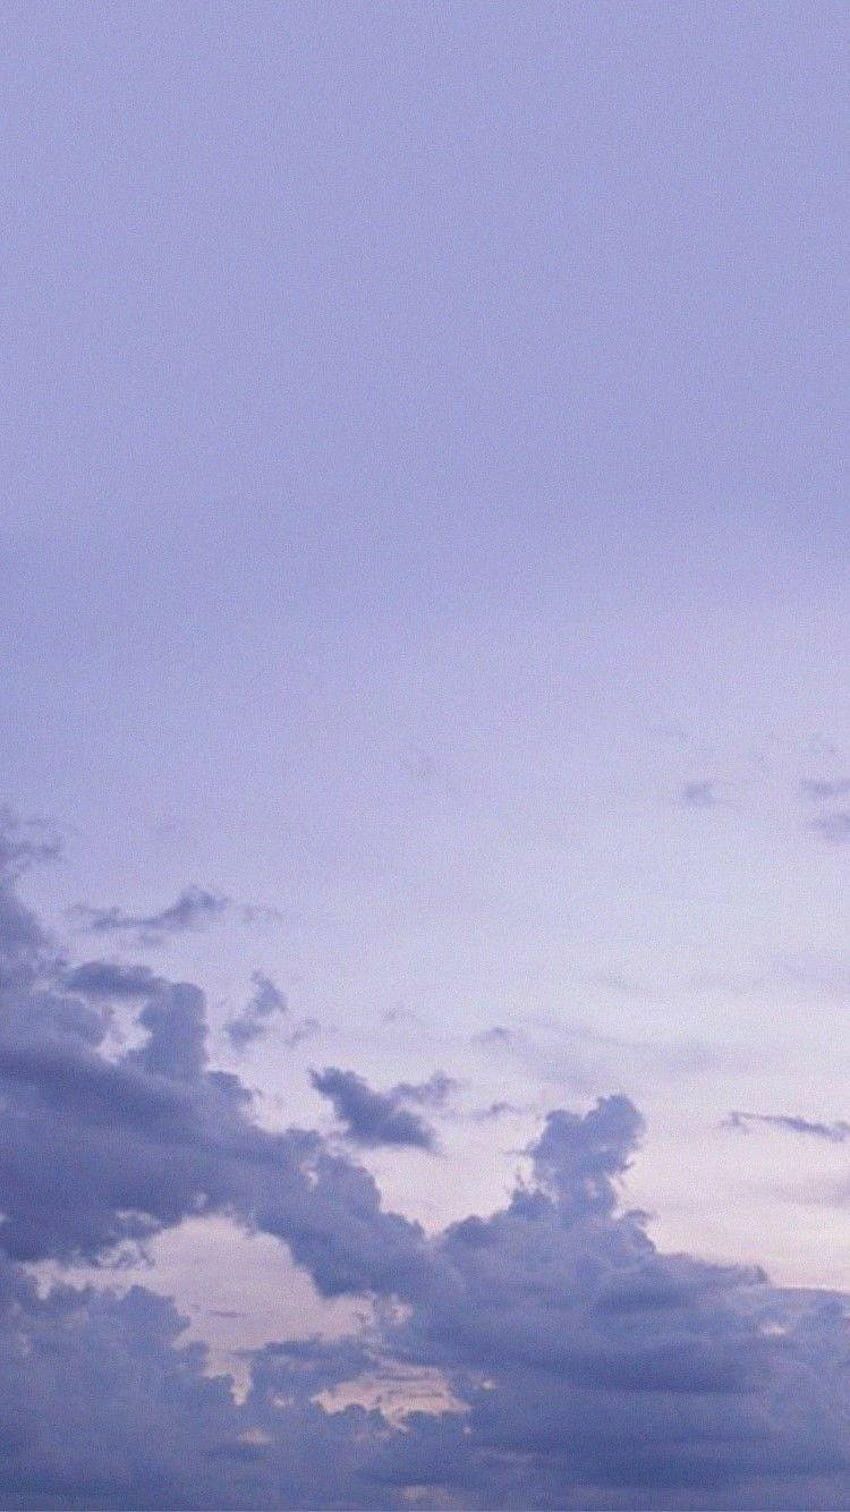 Aesthetic phone wallpaper of a blue sky with clouds - Cloud